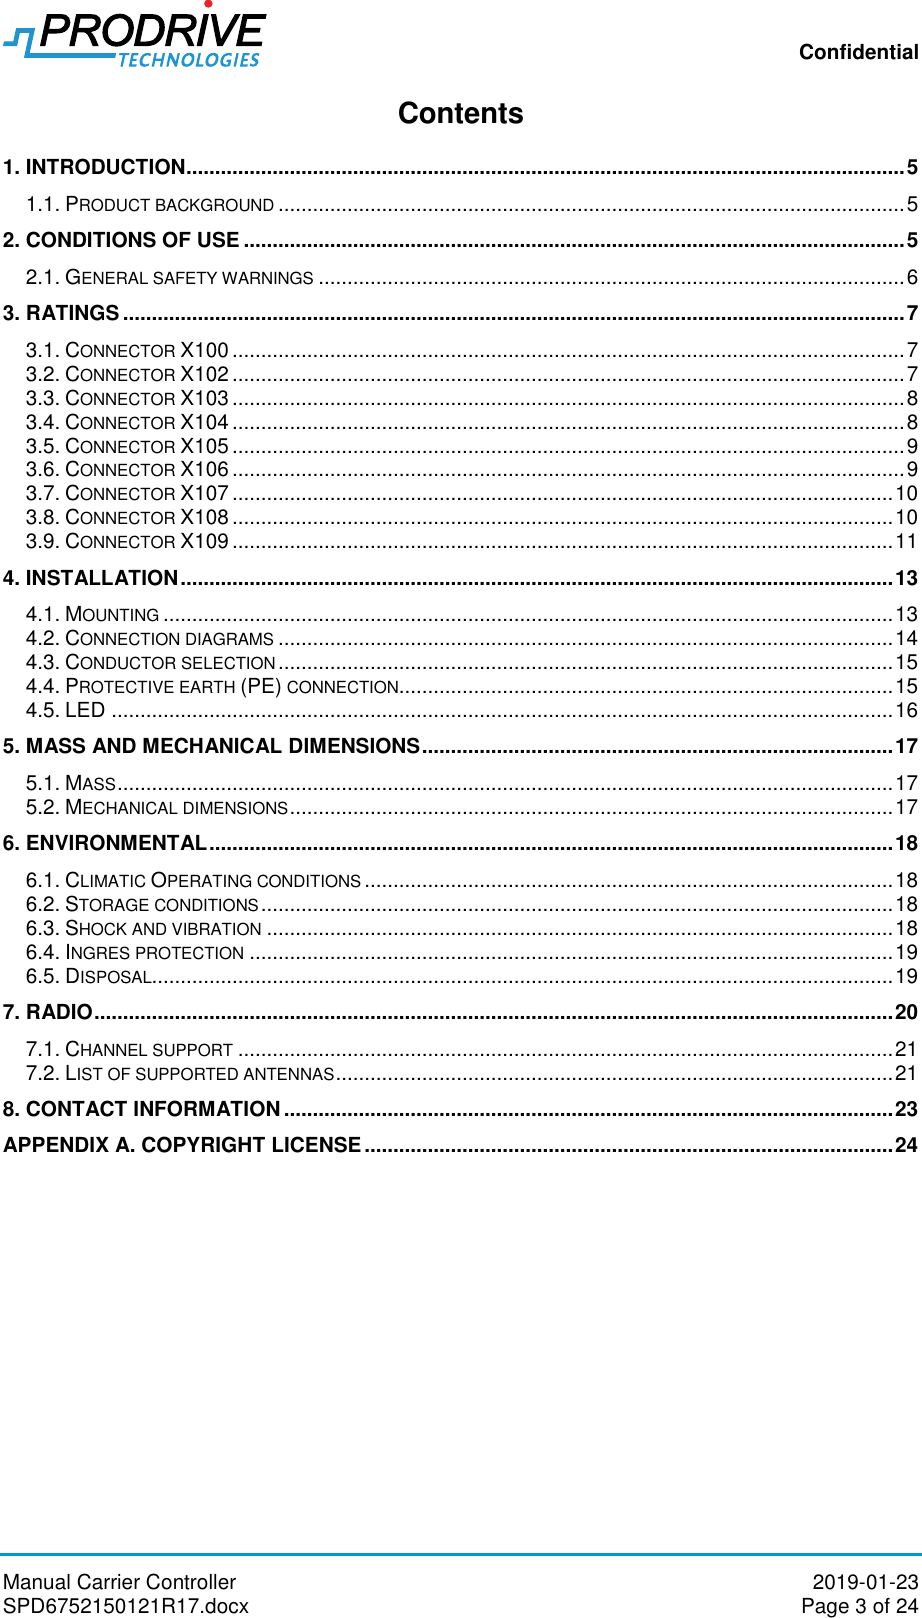 Confidential Manual Carrier Controller  2019-01-23 SPD6752150121R17.docx  Page 3 of 24 Contents 1. INTRODUCTION ............................................................................................................................. 5 1.1. PRODUCT BACKGROUND ............................................................................................................. 5 2. CONDITIONS OF USE ................................................................................................................... 5 2.1. GENERAL SAFETY WARNINGS ...................................................................................................... 6 3. RATINGS ........................................................................................................................................ 7 3.1. CONNECTOR X100 ..................................................................................................................... 7 3.2. CONNECTOR X102 ..................................................................................................................... 7 3.3. CONNECTOR X103 ..................................................................................................................... 8 3.4. CONNECTOR X104 ..................................................................................................................... 8 3.5. CONNECTOR X105 ..................................................................................................................... 9 3.6. CONNECTOR X106 ..................................................................................................................... 9 3.7. CONNECTOR X107 ................................................................................................................... 10 3.8. CONNECTOR X108 ................................................................................................................... 10 3.9. CONNECTOR X109 ................................................................................................................... 11 4. INSTALLATION ............................................................................................................................ 13 4.1. MOUNTING ............................................................................................................................... 13 4.2. CONNECTION DIAGRAMS ........................................................................................................... 14 4.3. CONDUCTOR SELECTION ........................................................................................................... 15 4.4. PROTECTIVE EARTH (PE) CONNECTION ...................................................................................... 15 4.5. LED ........................................................................................................................................ 16 5. MASS AND MECHANICAL DIMENSIONS .................................................................................. 17 5.1. MASS ....................................................................................................................................... 17 5.2. MECHANICAL DIMENSIONS ......................................................................................................... 17 6. ENVIRONMENTAL ....................................................................................................................... 18 6.1. CLIMATIC OPERATING CONDITIONS ............................................................................................ 18 6.2. STORAGE CONDITIONS .............................................................................................................. 18 6.3. SHOCK AND VIBRATION ............................................................................................................. 18 6.4. INGRES PROTECTION ................................................................................................................ 19 6.5. DISPOSAL................................................................................................................................. 19 7. RADIO ........................................................................................................................................... 20 7.1. CHANNEL SUPPORT .................................................................................................................. 21 7.2. LIST OF SUPPORTED ANTENNAS ................................................................................................. 21 8. CONTACT INFORMATION .......................................................................................................... 23 APPENDIX A. COPYRIGHT LICENSE ............................................................................................ 24          